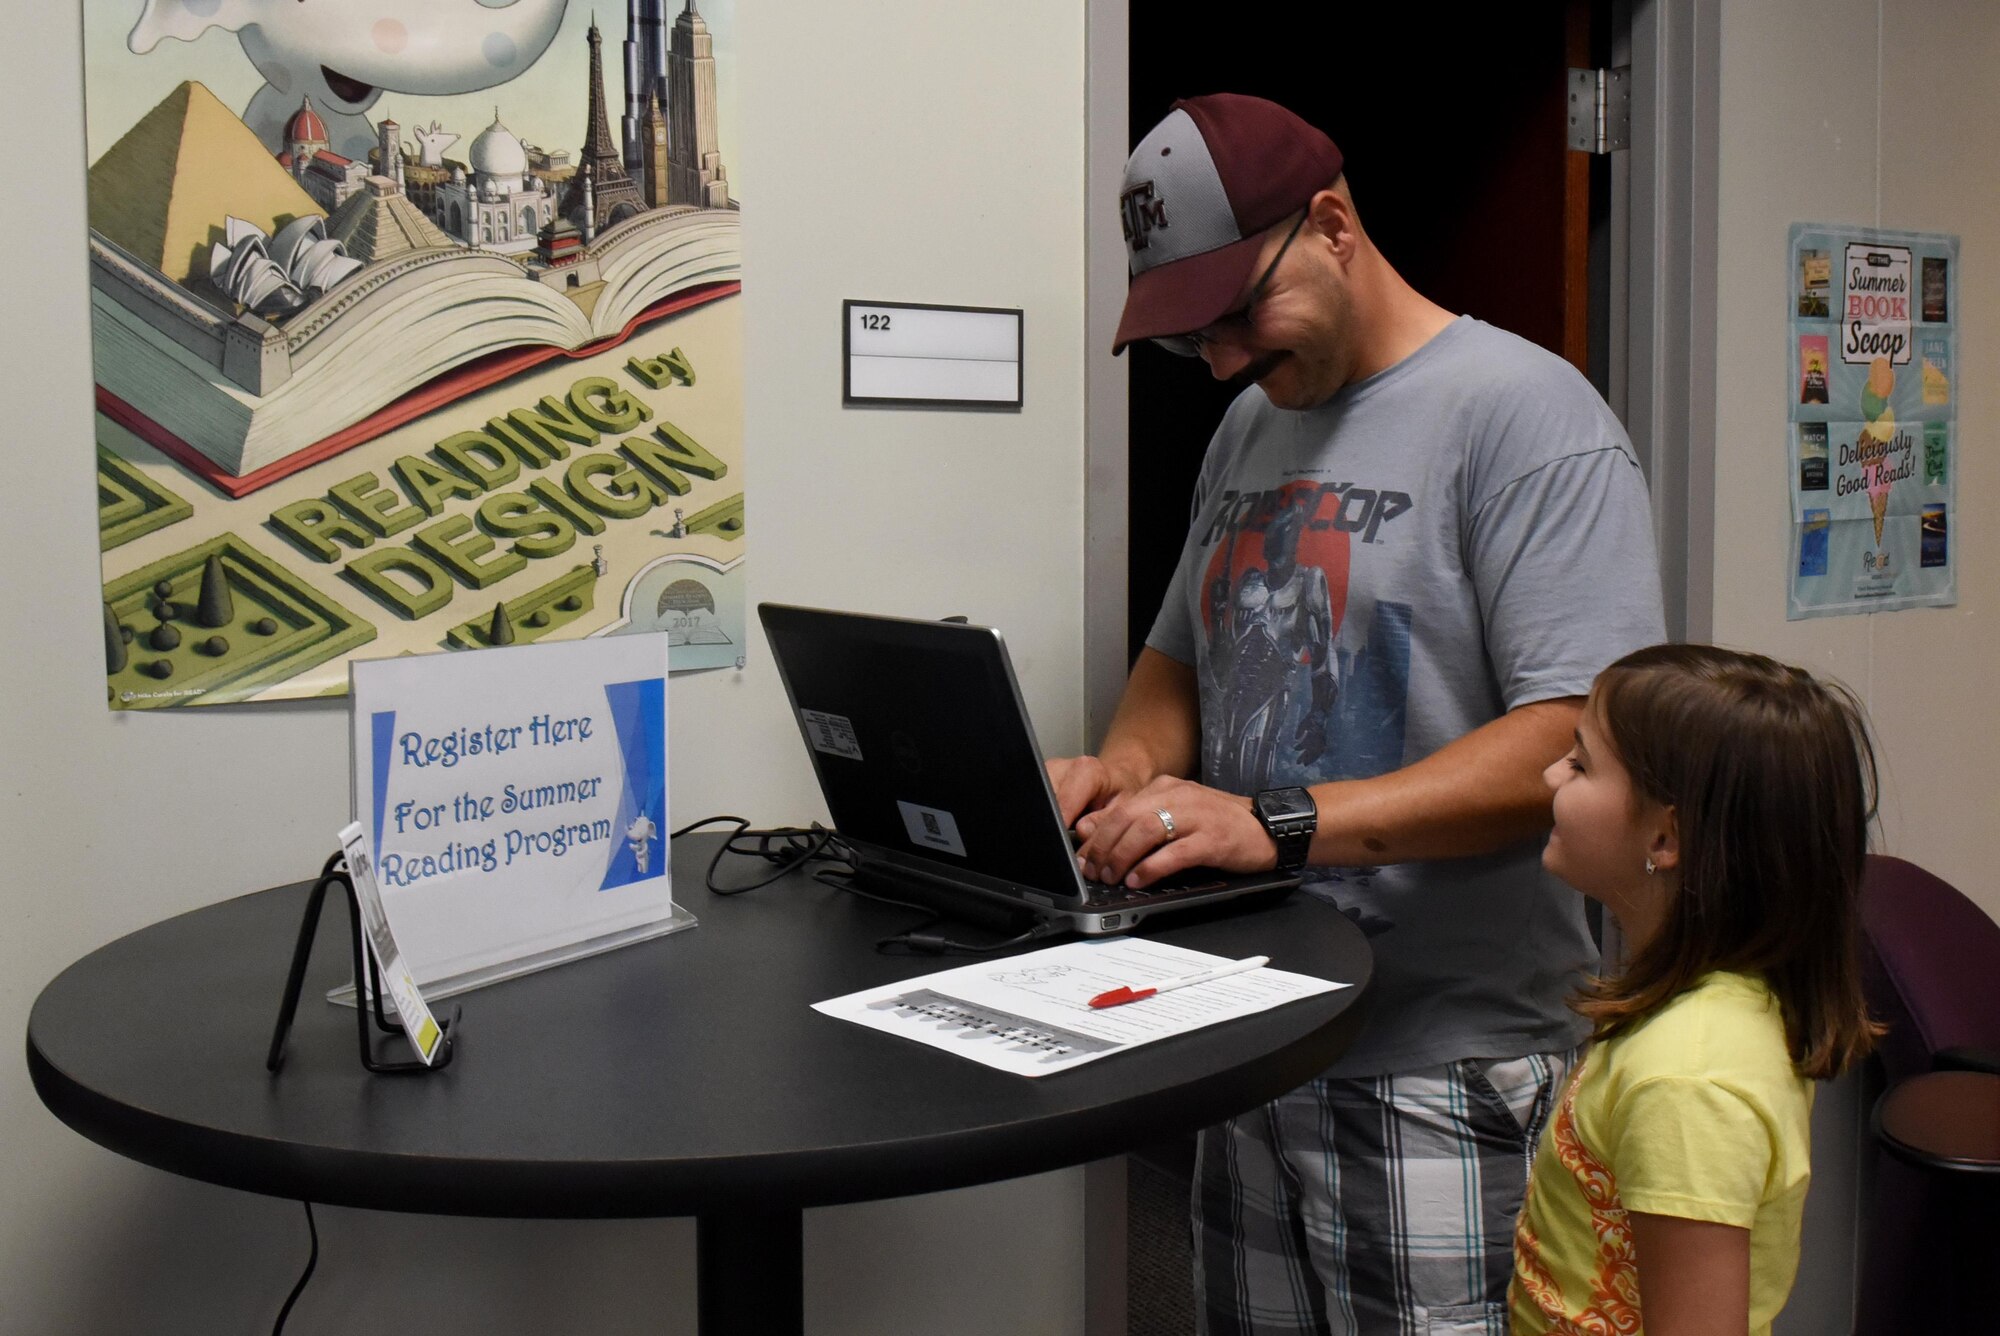 Tech. Sgt. Jarrett Harkey, 4th Equipment Maintenance Squadron aircraft structural phase lead, and his daughter, sign up for the Department of Defense Summer Reading Program, June 13, 2017, at the base library at Seymour Johnson Air Force Base, North Carolina. Participants ages birth through adulthood can register for the Summer Reading Program at the library or online at https://seymourjohnson.beanstack.org/reader365. (U.S. Air Force photo by Airman 1st Class Victoria Boyton)